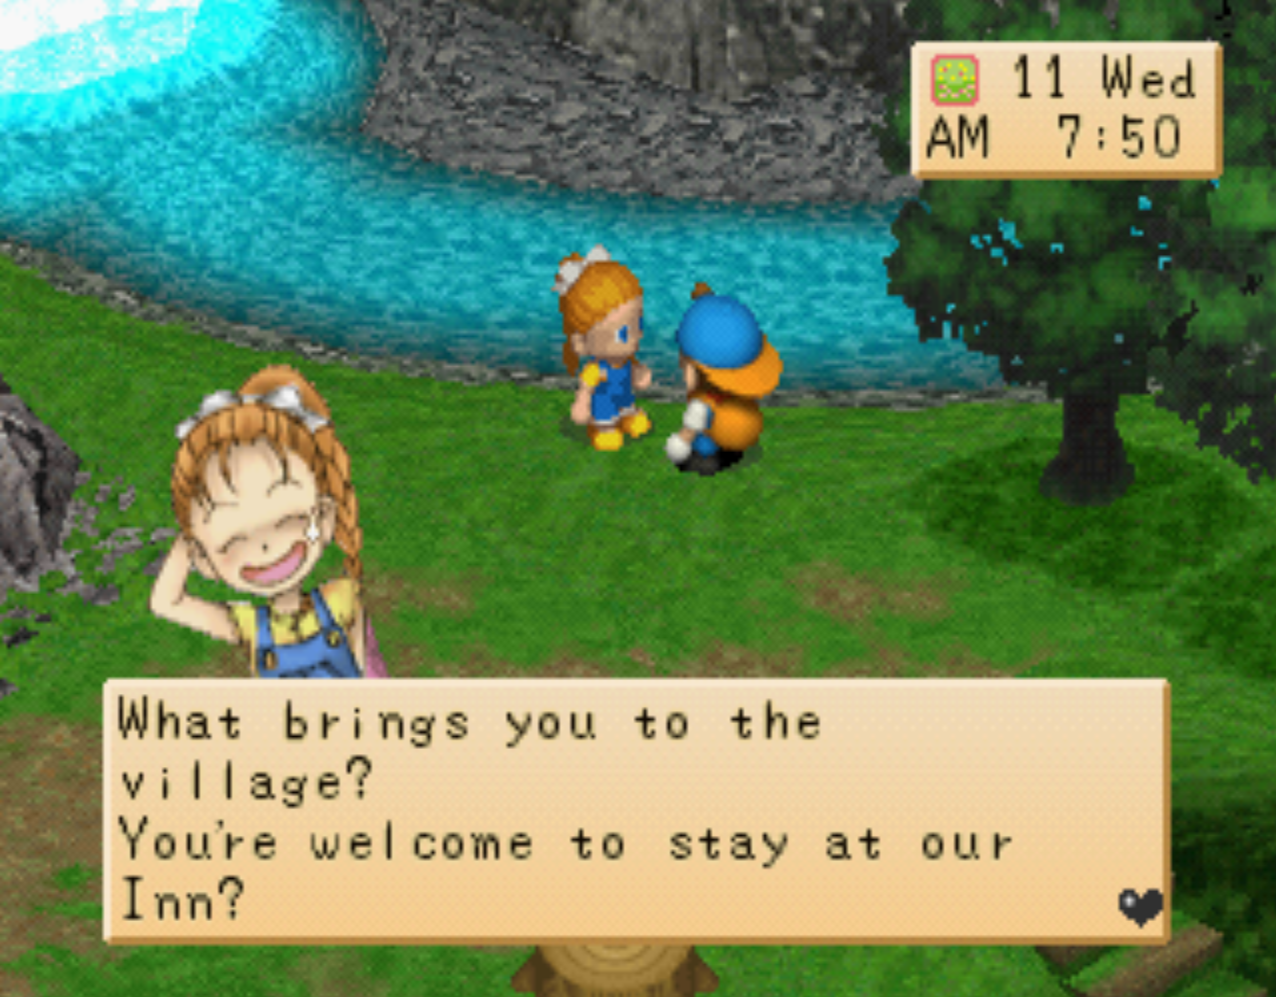 MEMORIES WITH HARVEST MOON: BACK TO NATURE